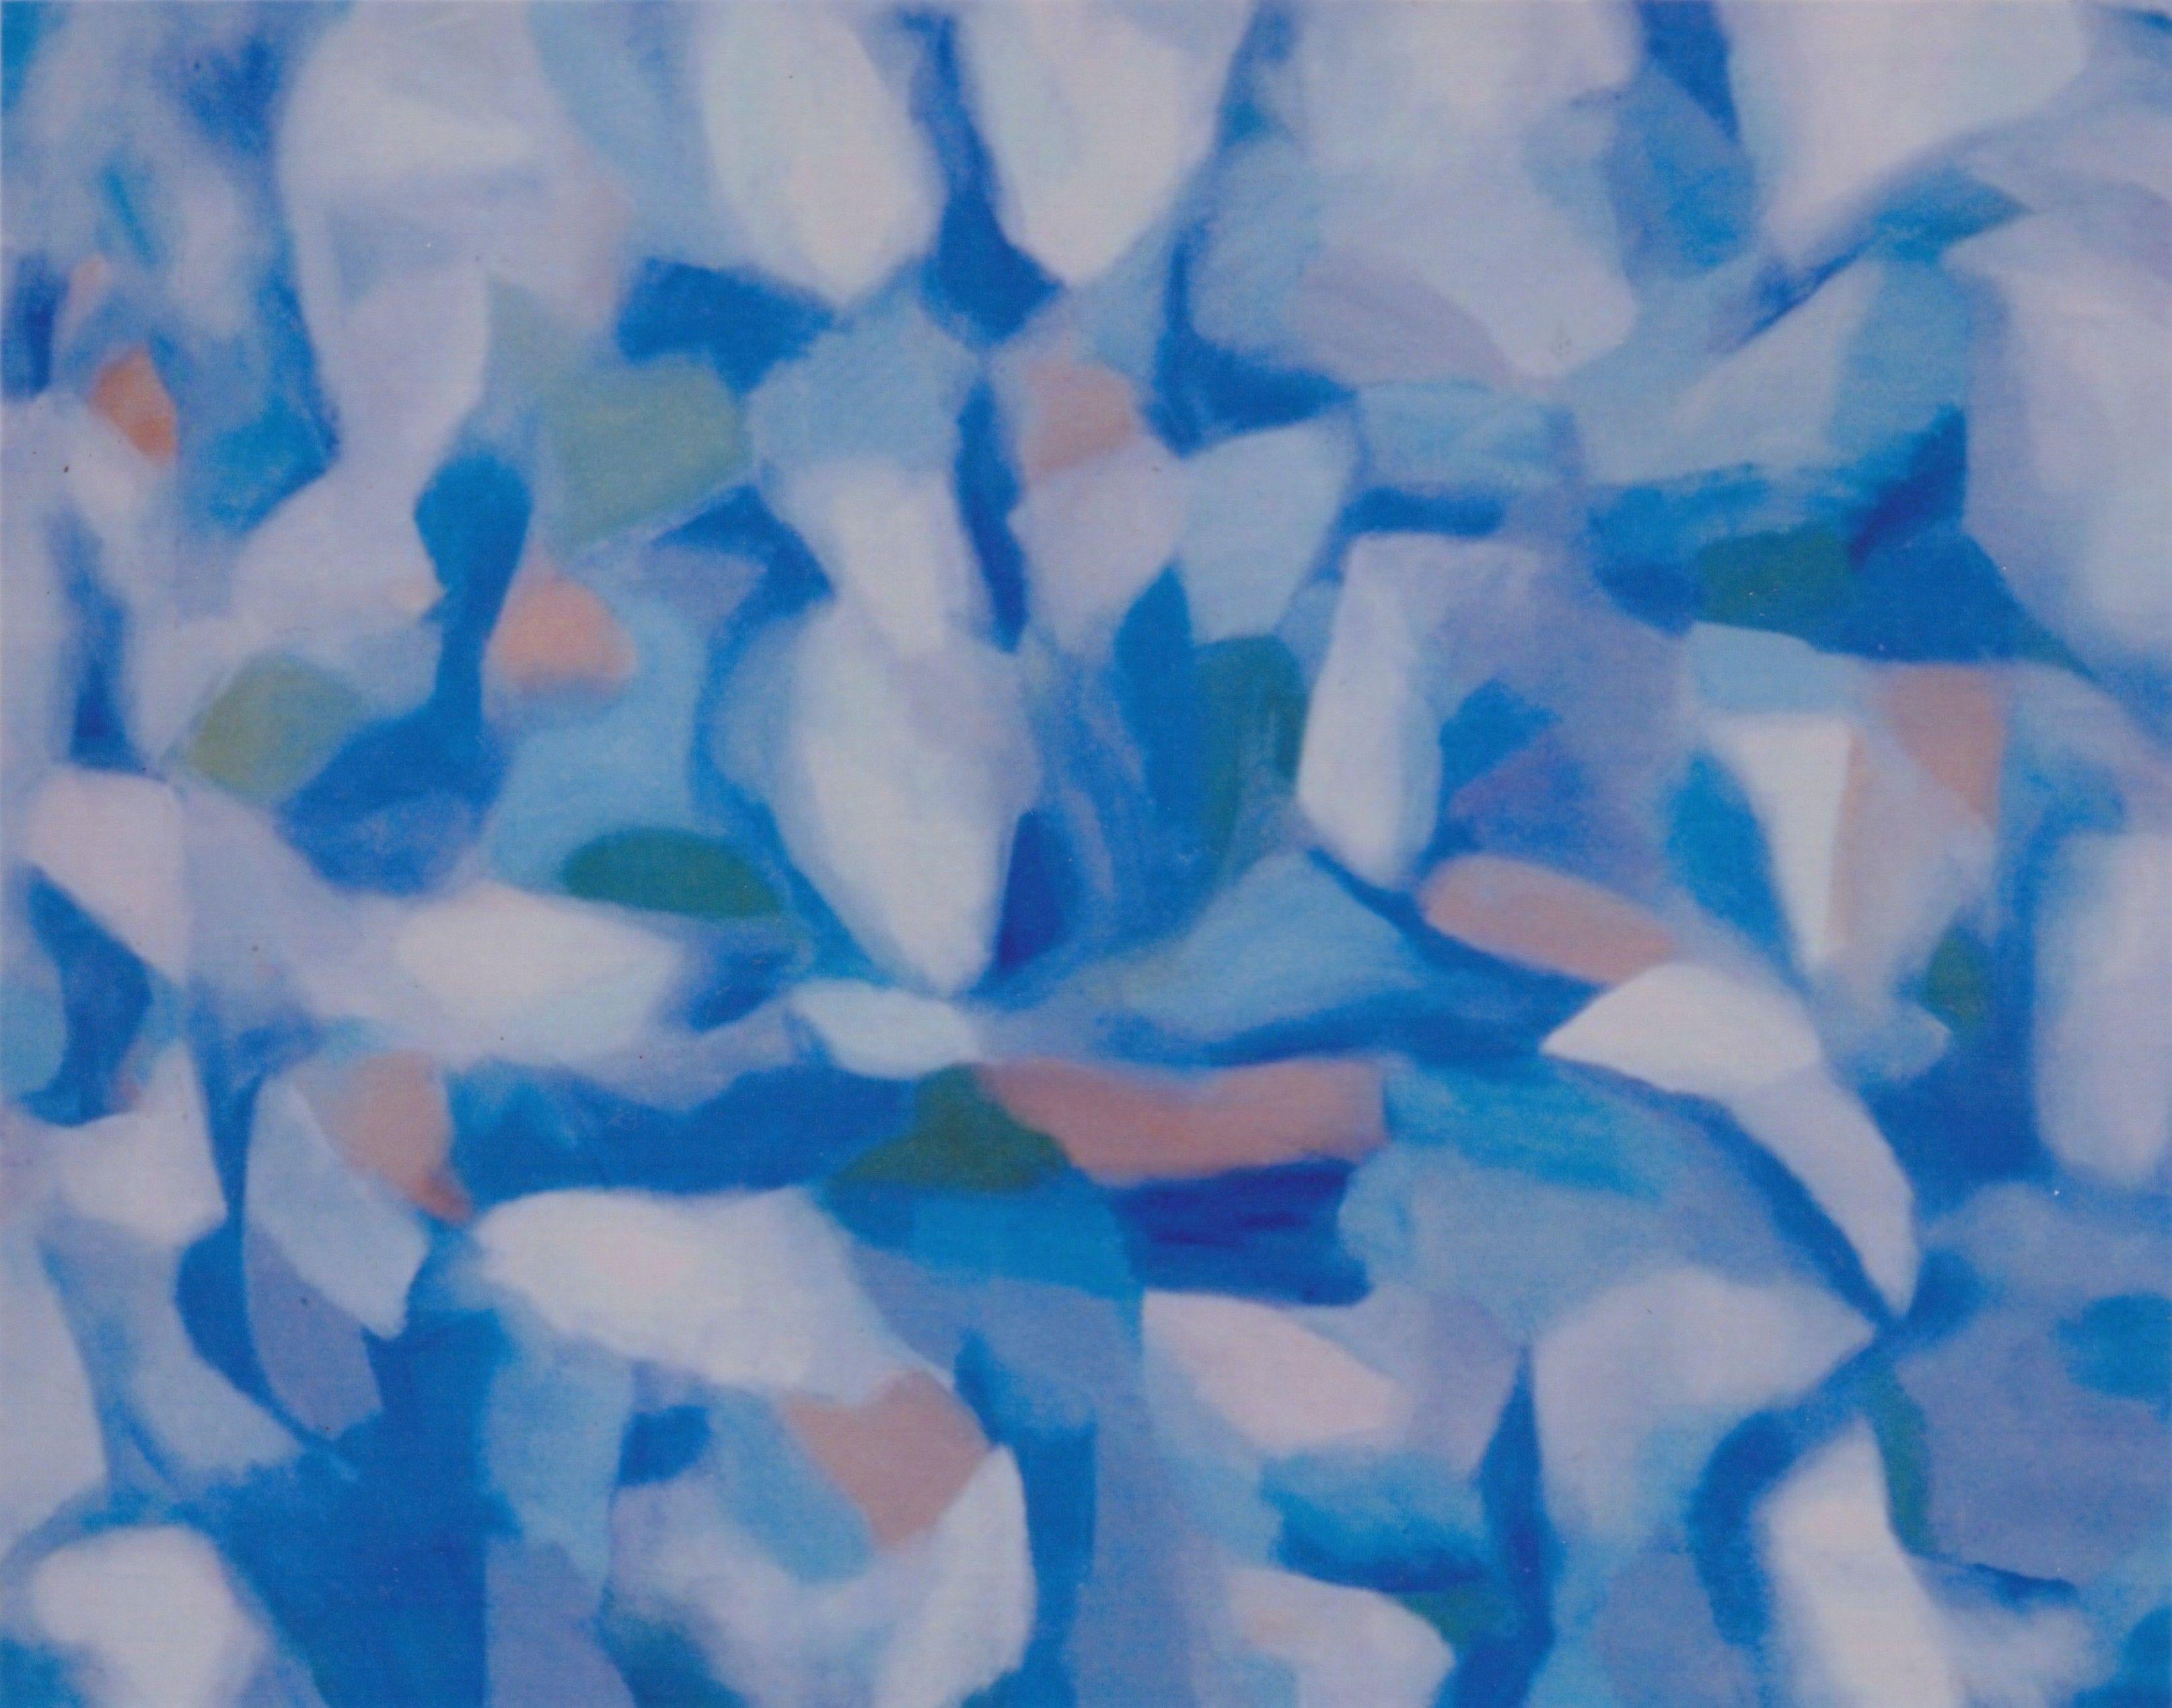 Gregg Simpson Abstract Painting - Blue Mosaic, Painting, Oil on Canvas